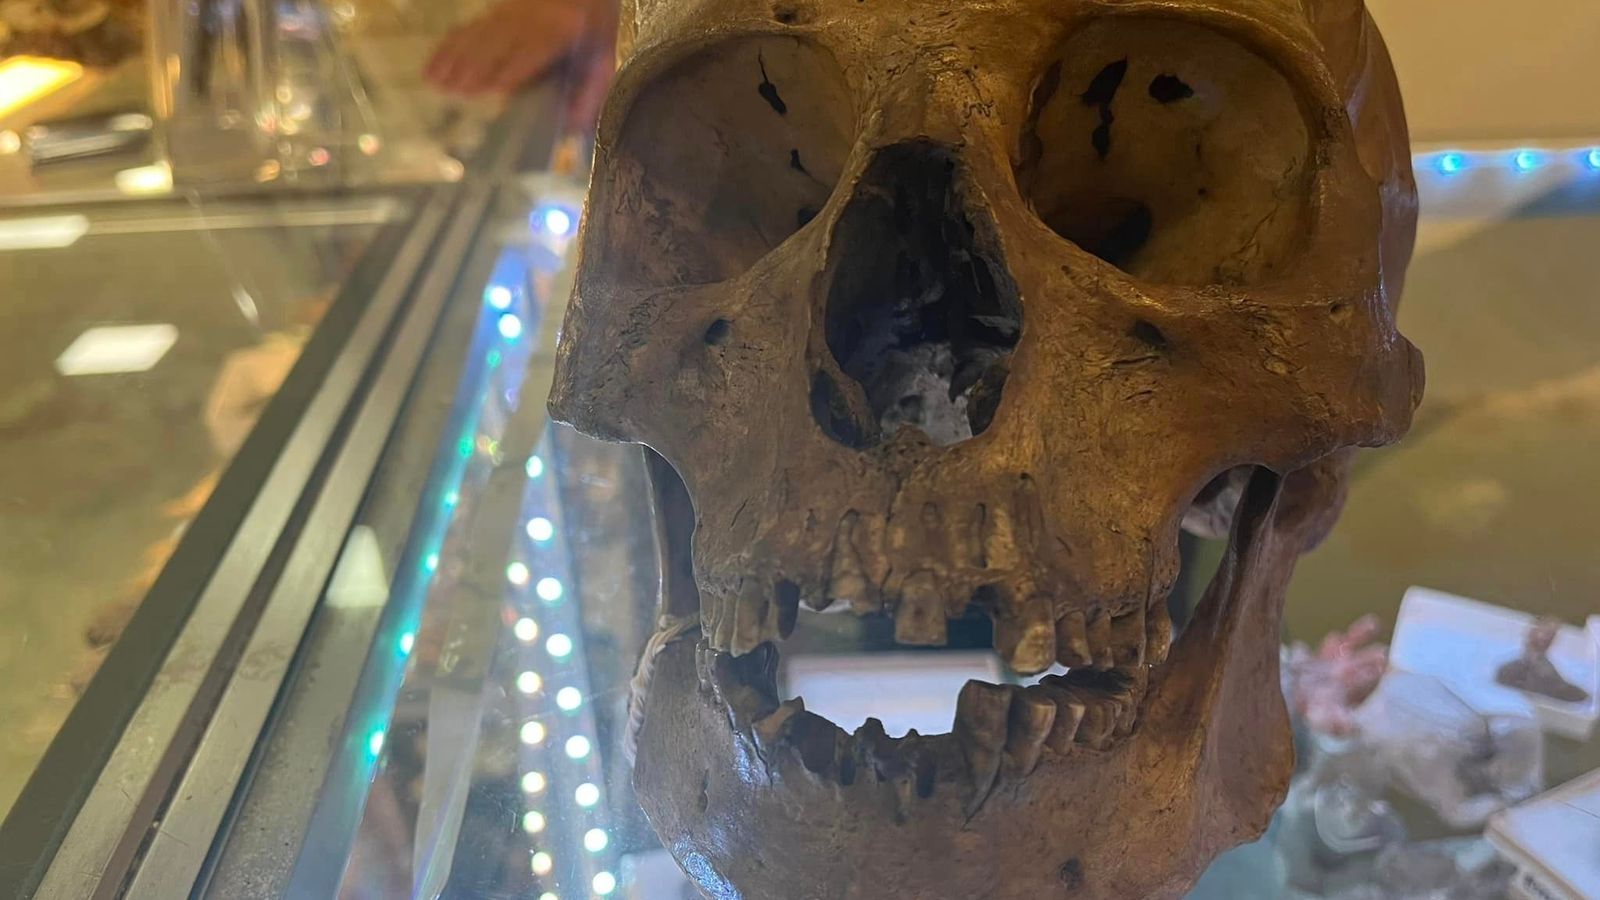 Human skull spotted in Florida charity shop's Halloween display